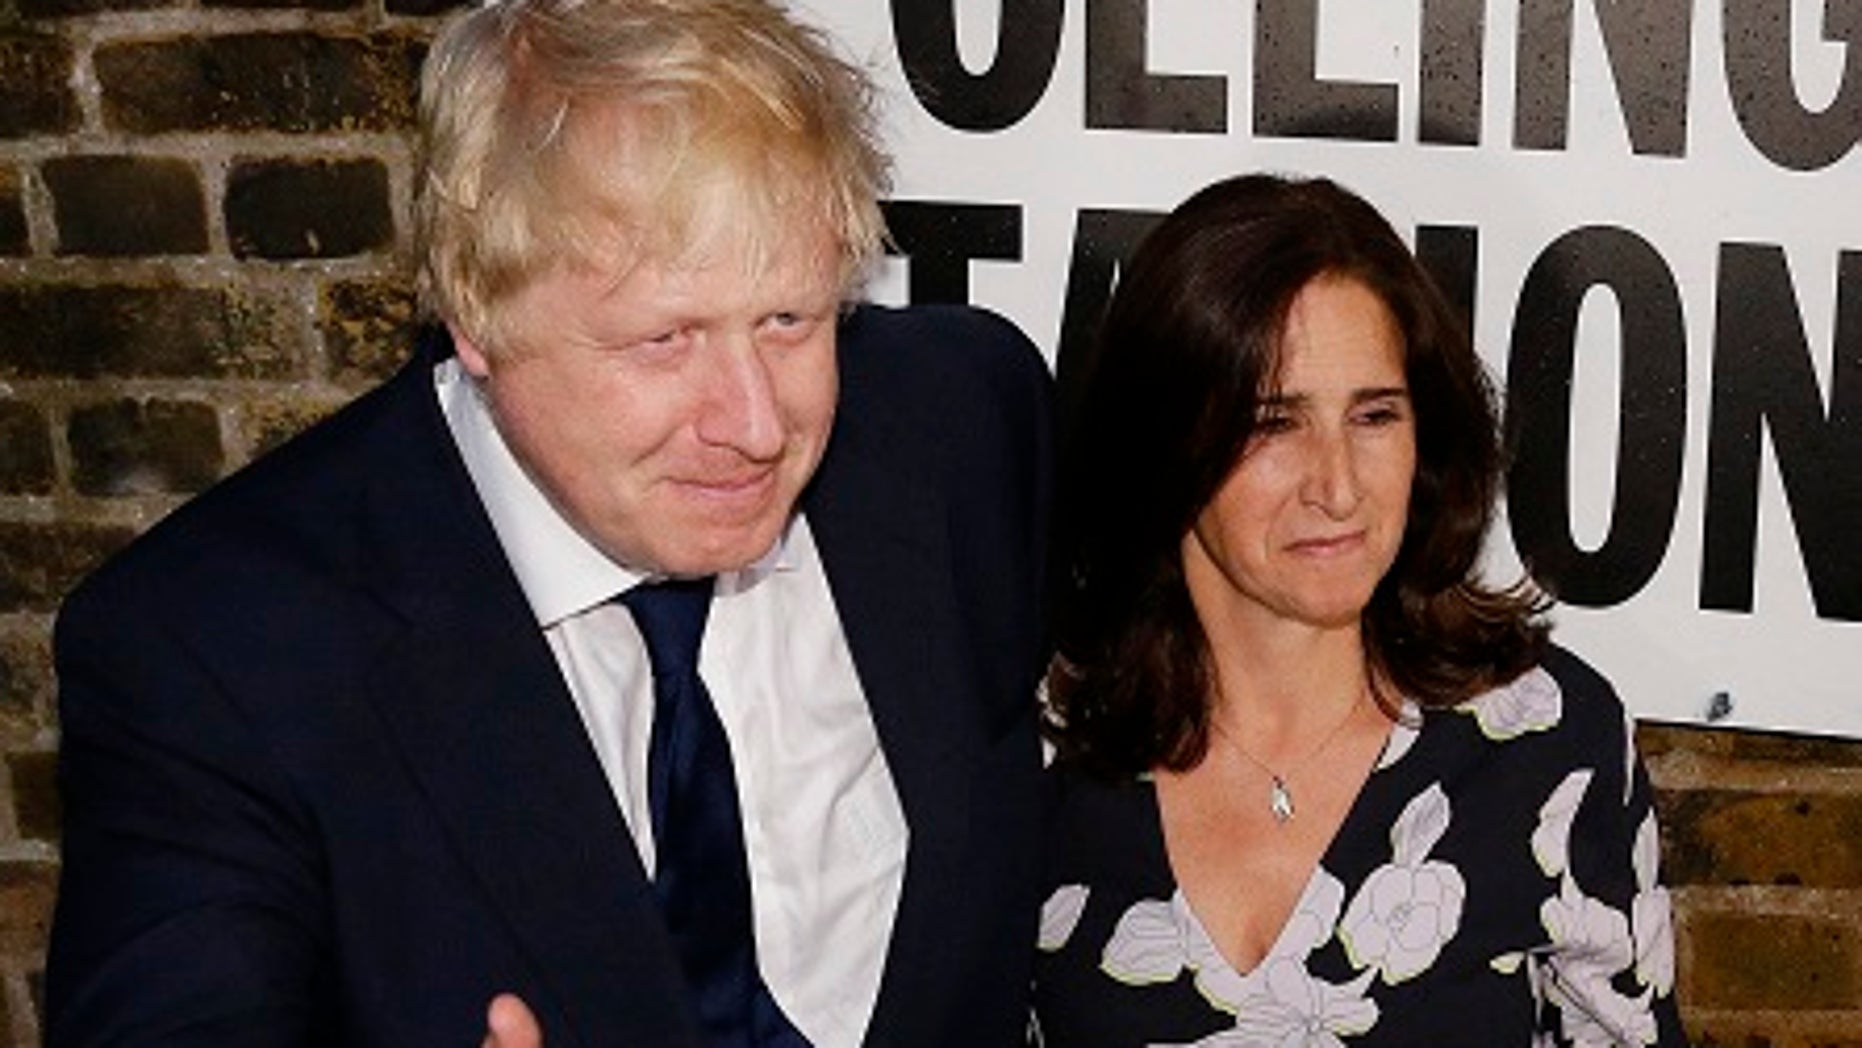 Boris Johnson Announces Divorce From Wife Marina Wheeler After 25 Years Amid Claims He Cheated 5412